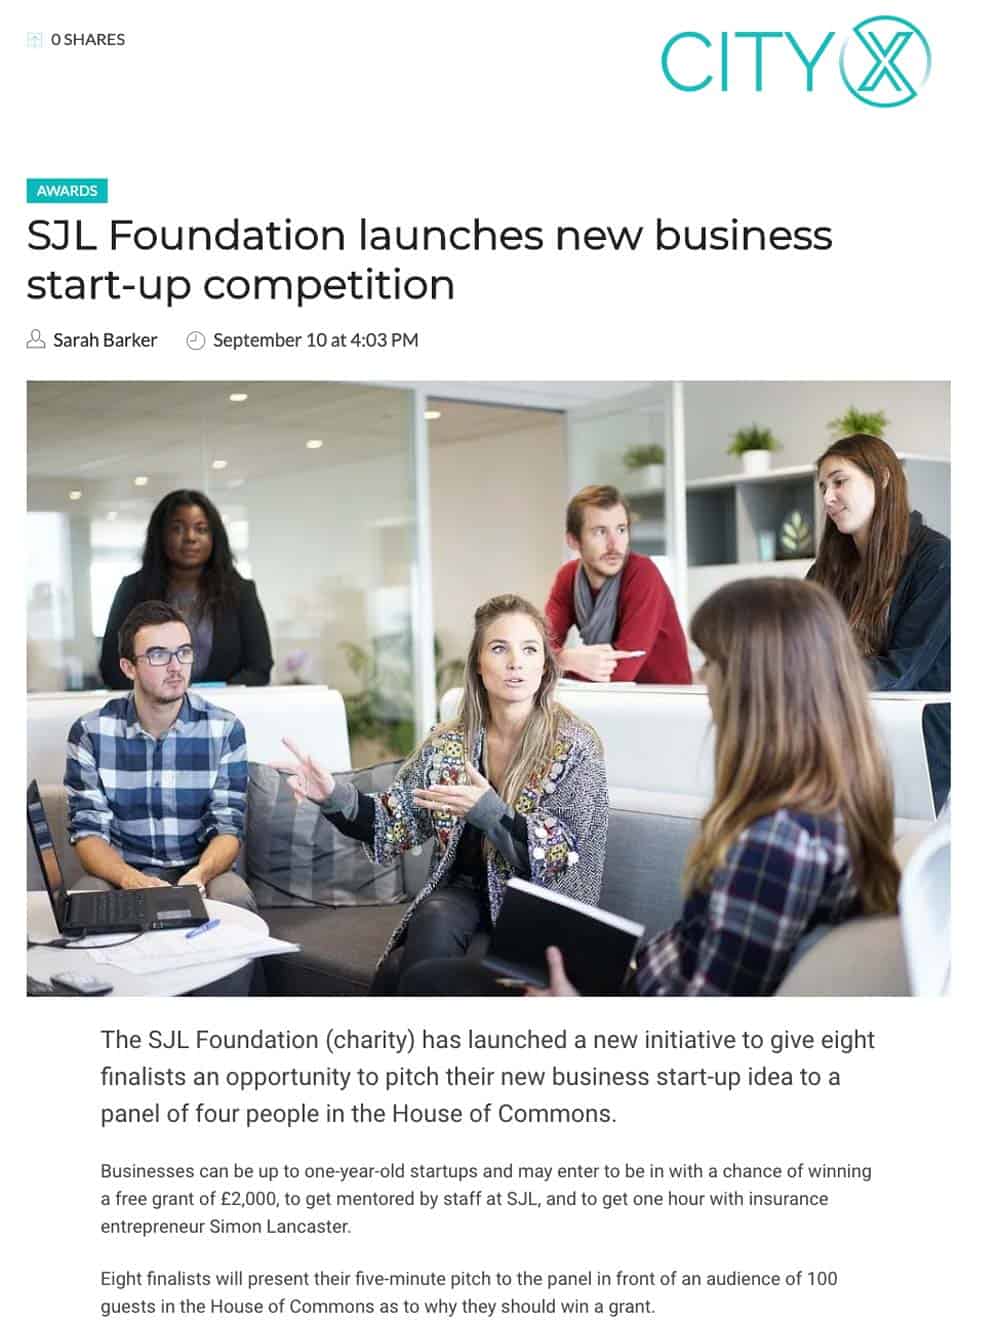 SJL-Foundation-CityX-Start-Up-Business-Competition